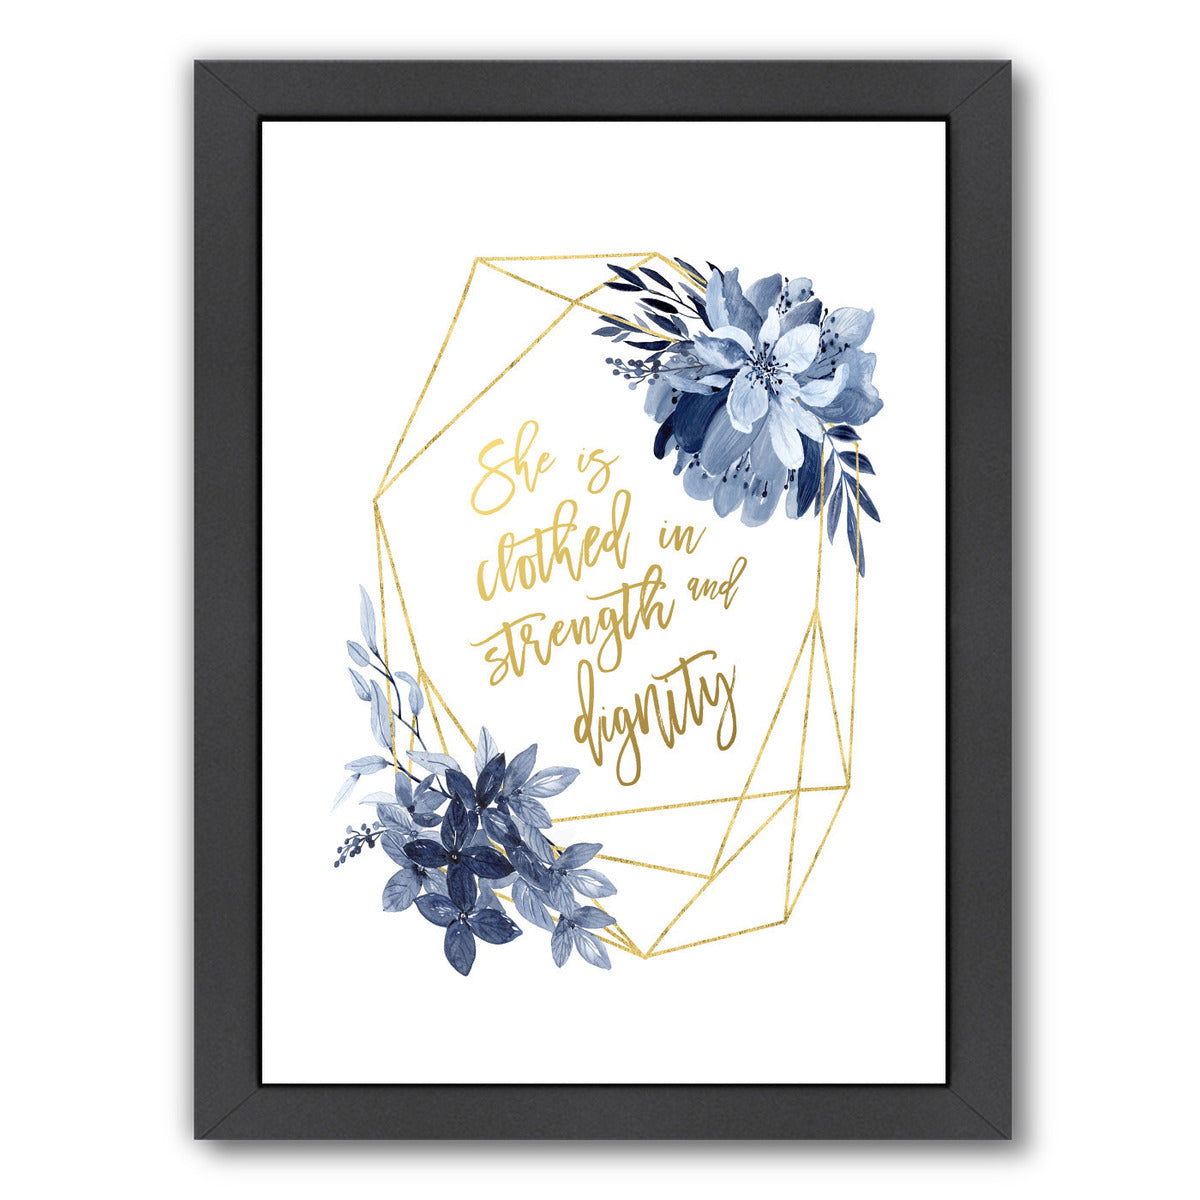 Clothed In Strengthy  Blue Flowers By Wall + Wonder - Black Framed Print - Wall Art - Americanflat